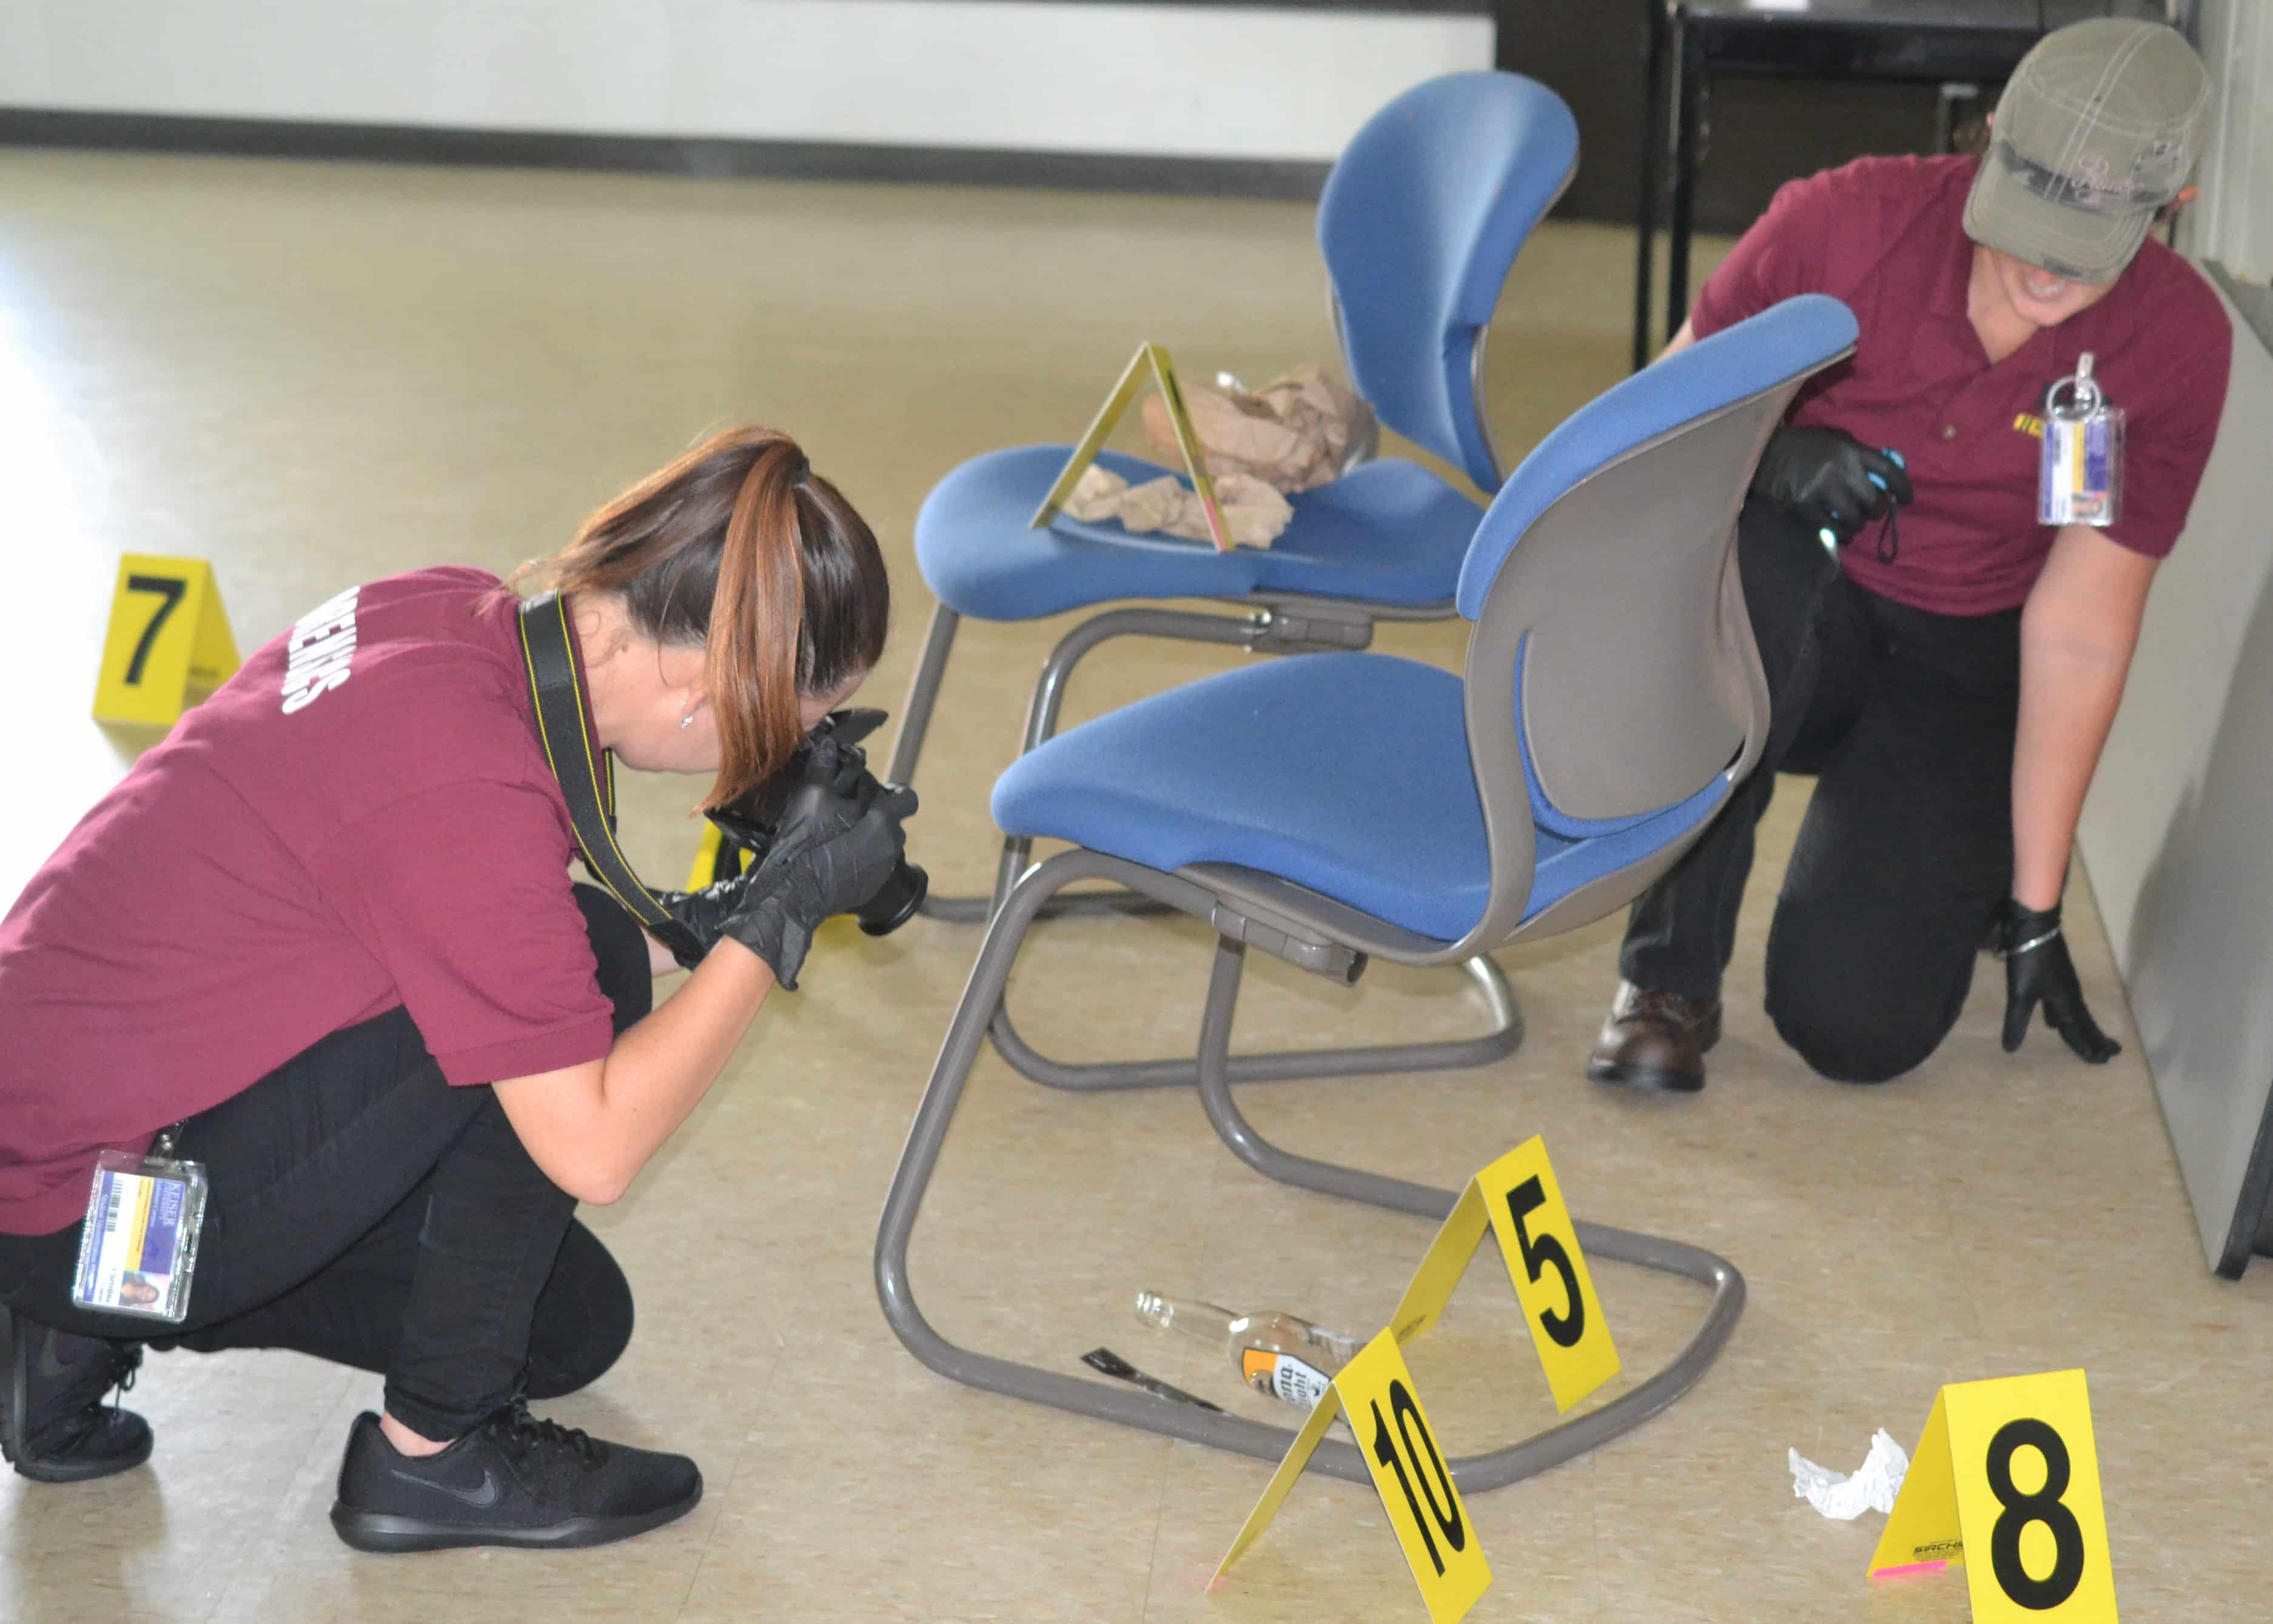 Forensic Students Put Skills to the Test in “Real World” Crime Scenario